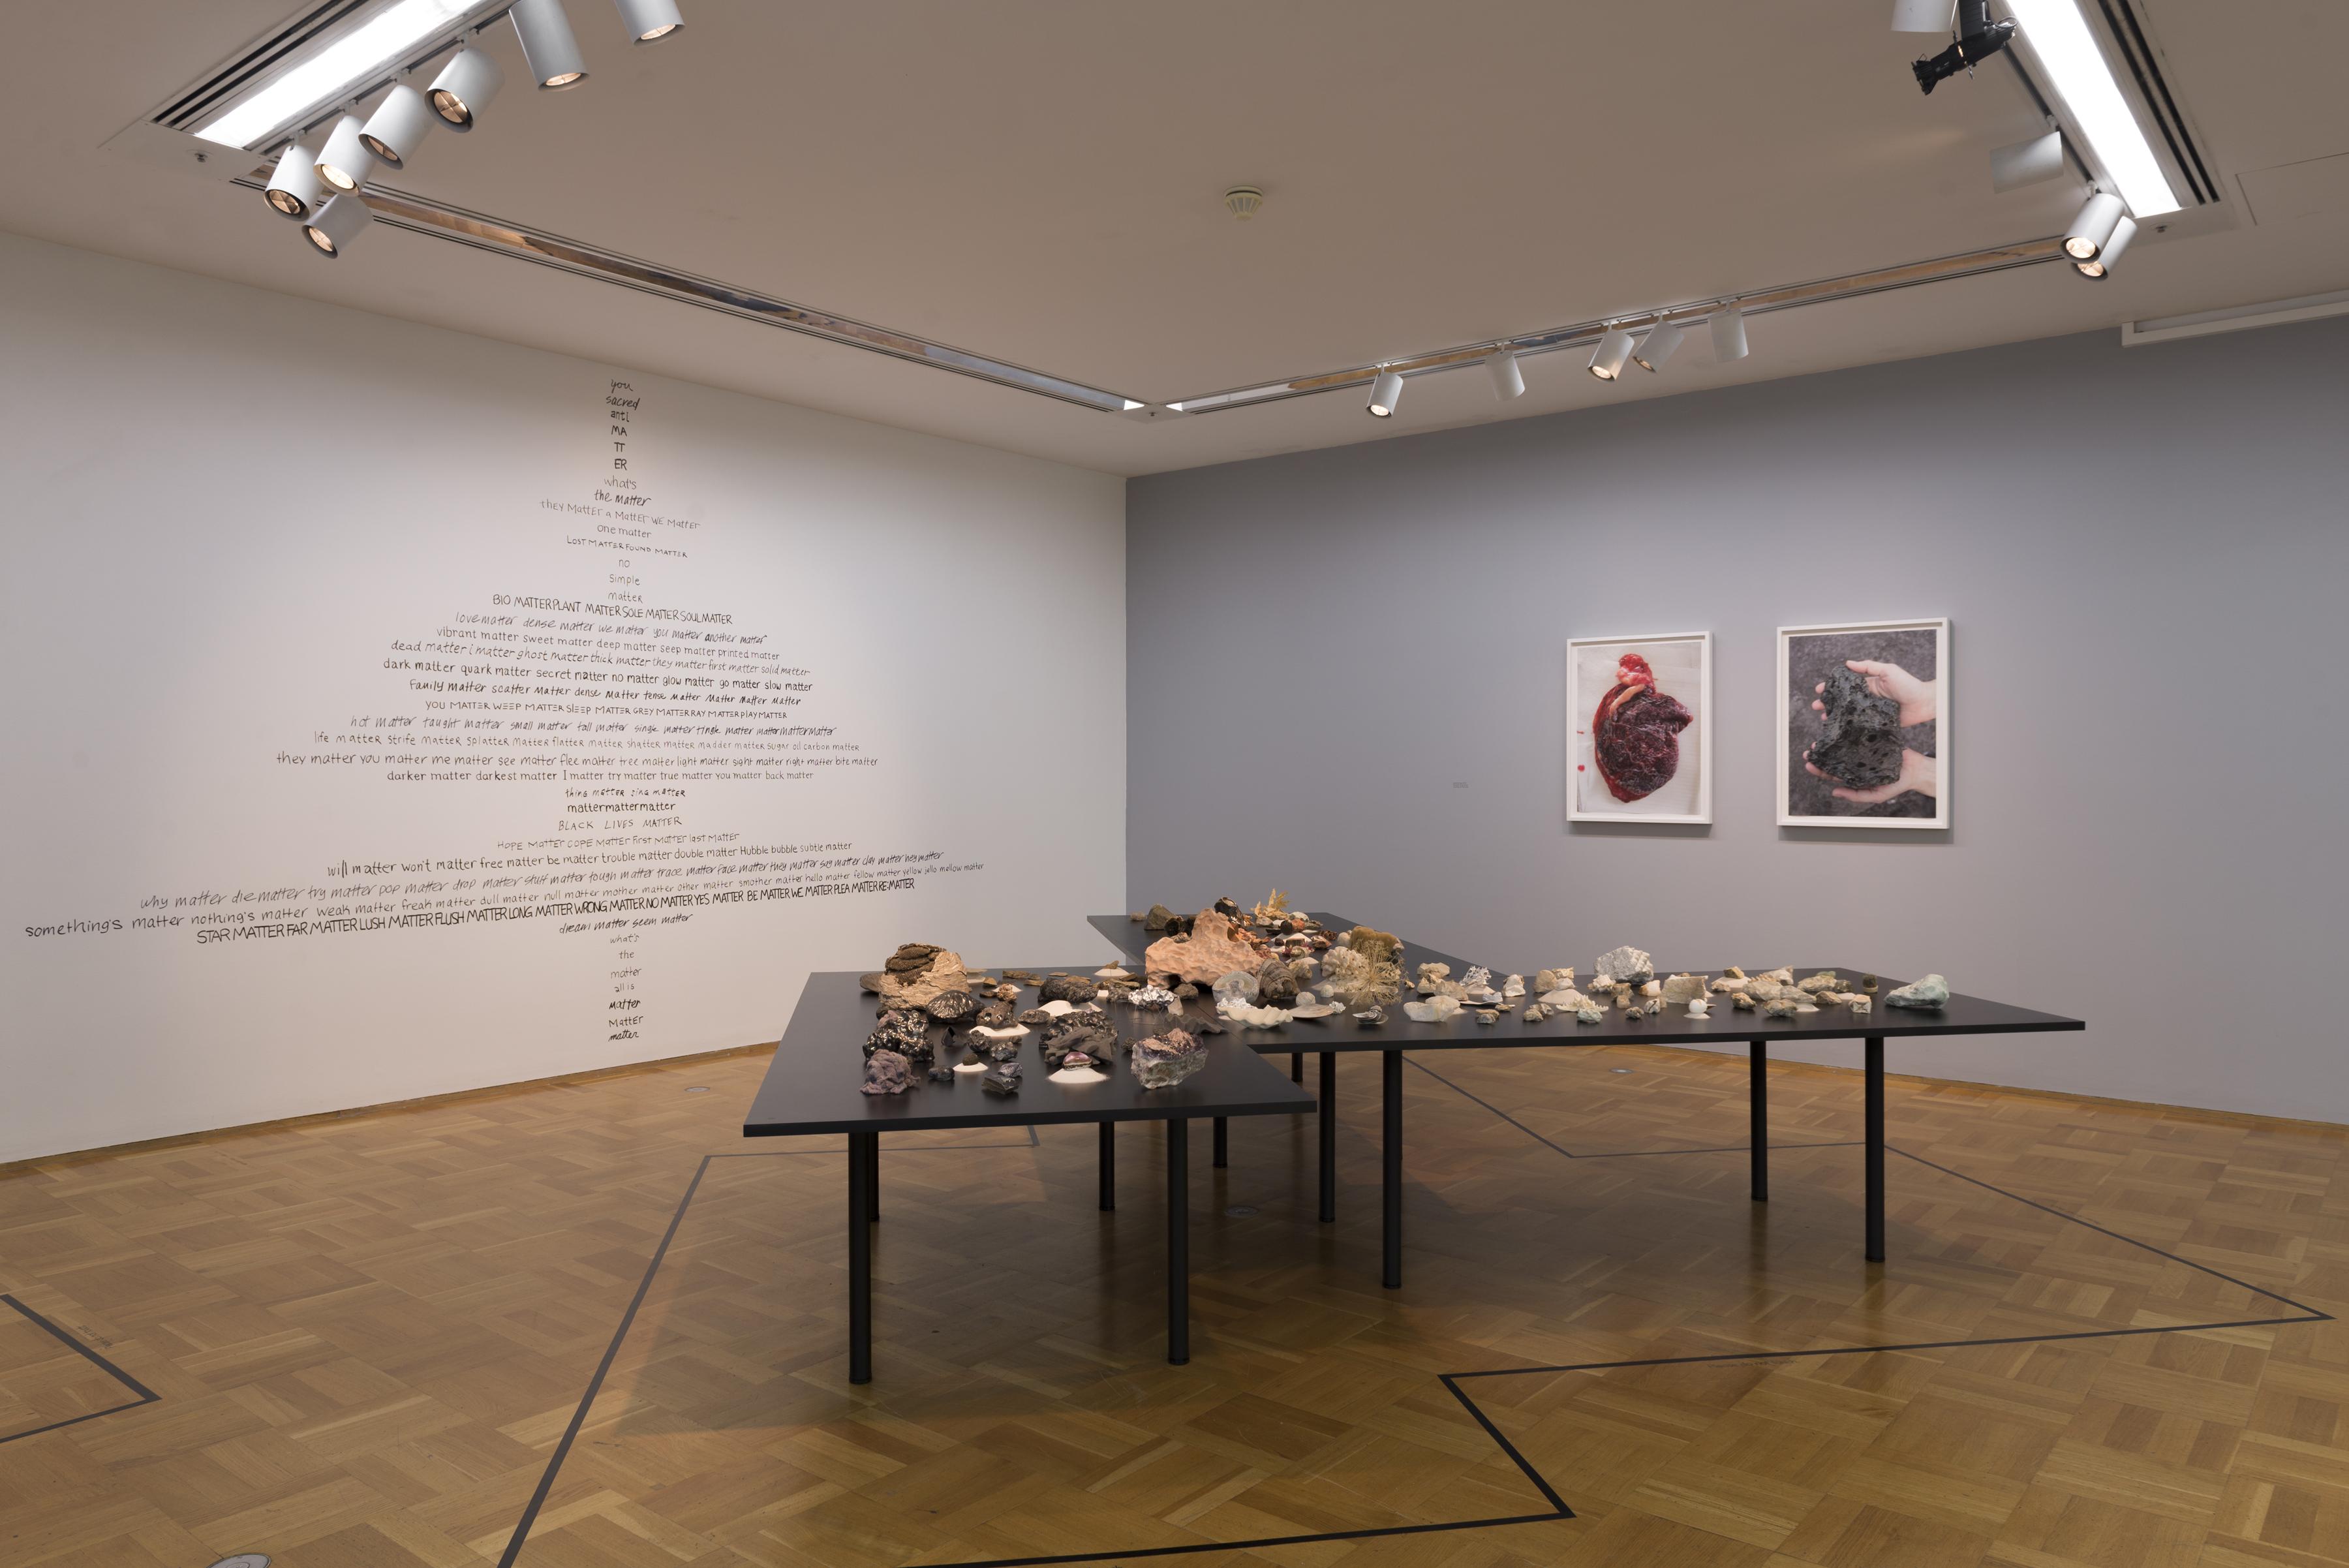 A gallery space contains an irregular-shaped table with various rock-like objects displayed on it. On an adjacent wall are hung a photograph of a human placenta and a photograph of a lava rock. On the other wall is a center-aligned text piece.